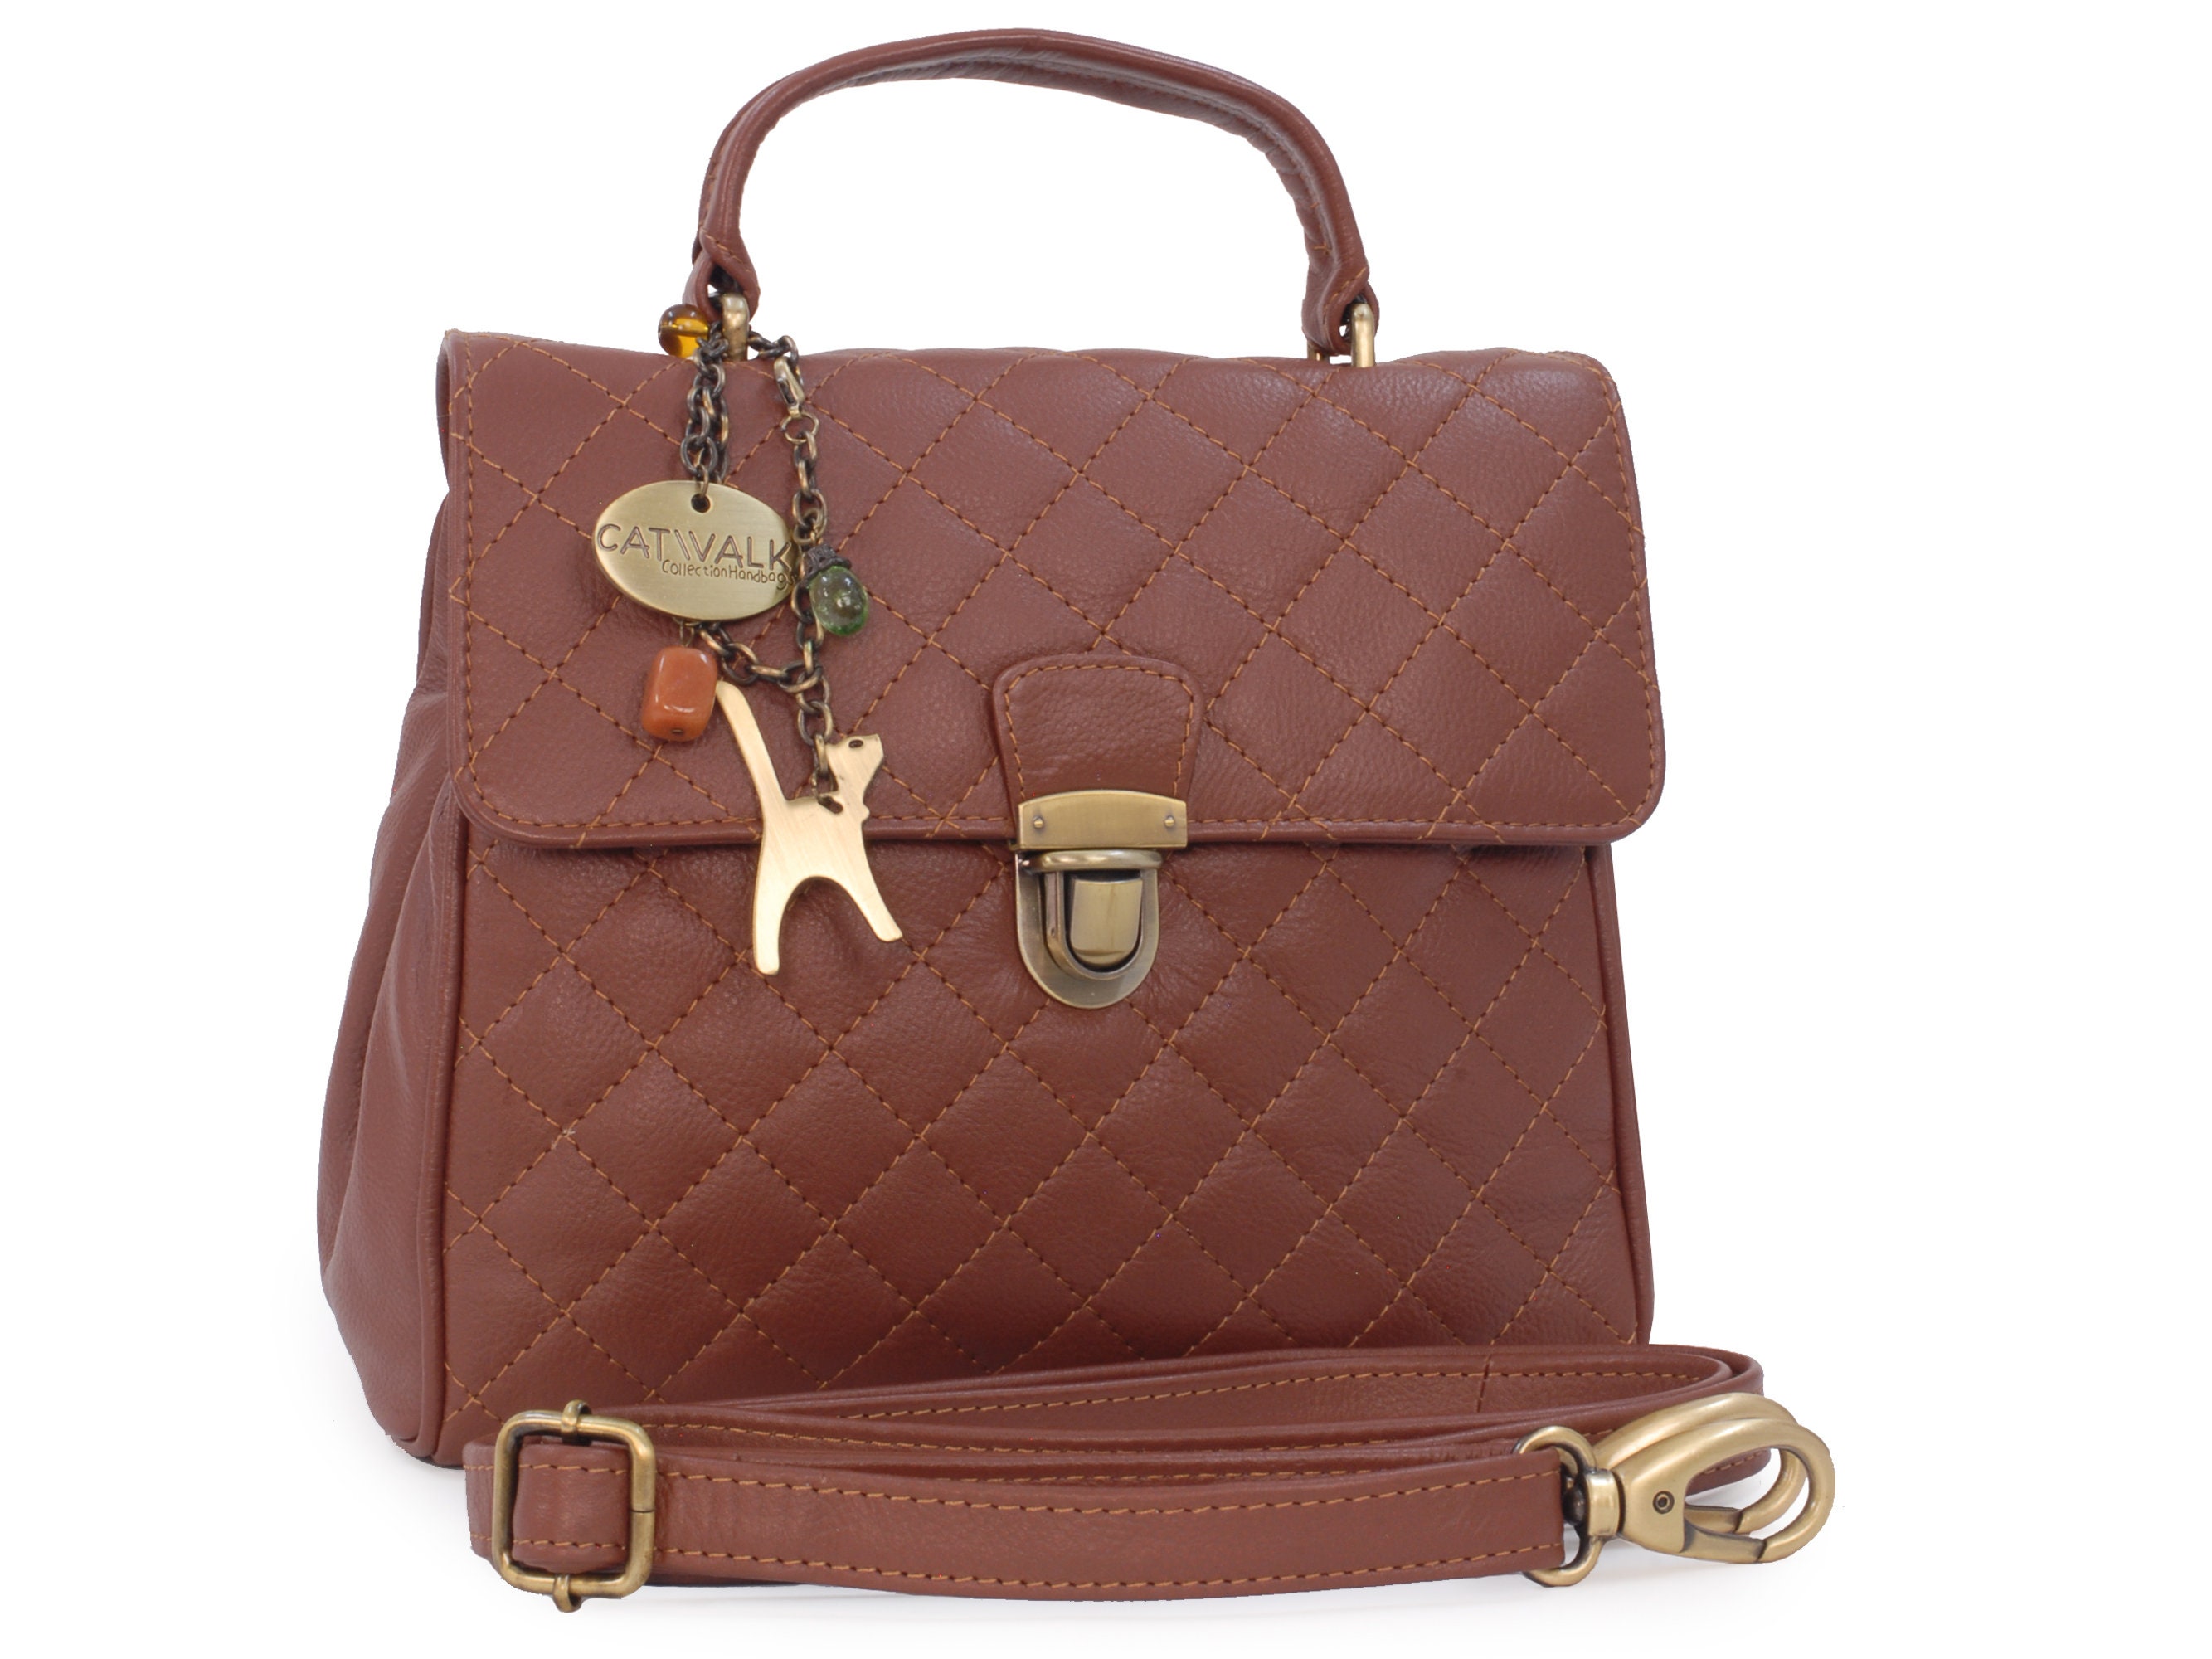 Catwalk Collection Handbags - Small Crossbody Bag For Women - Shoulder Bag - Fits Smart Phone - Smooth Leather - Florence - Brown